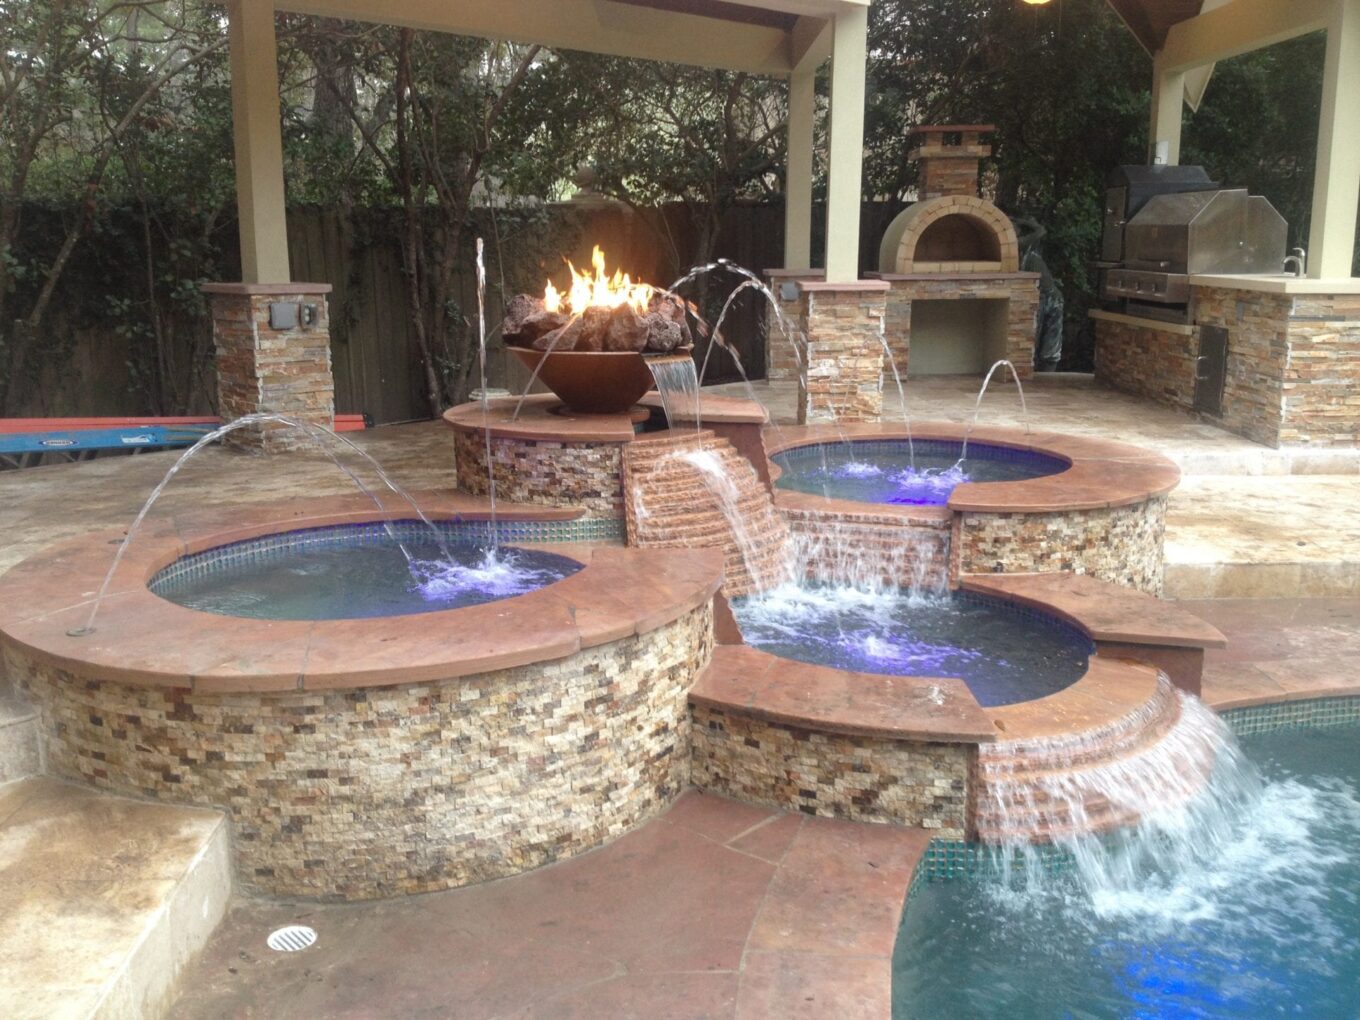 A fire pit with several fountains in the middle of it.